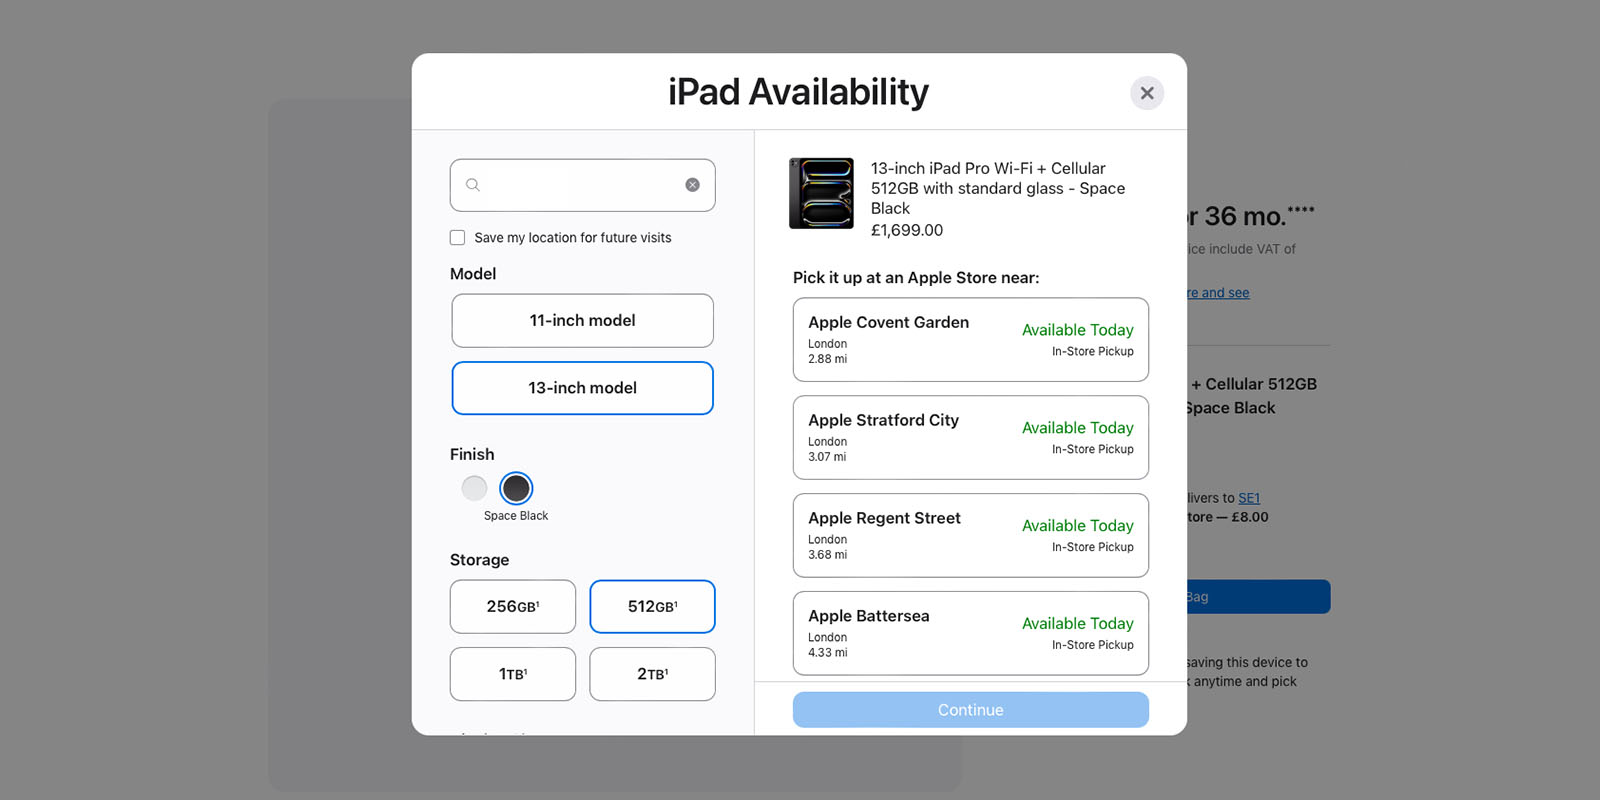 New iPad Air and iPad Pro availability shown in screengrab